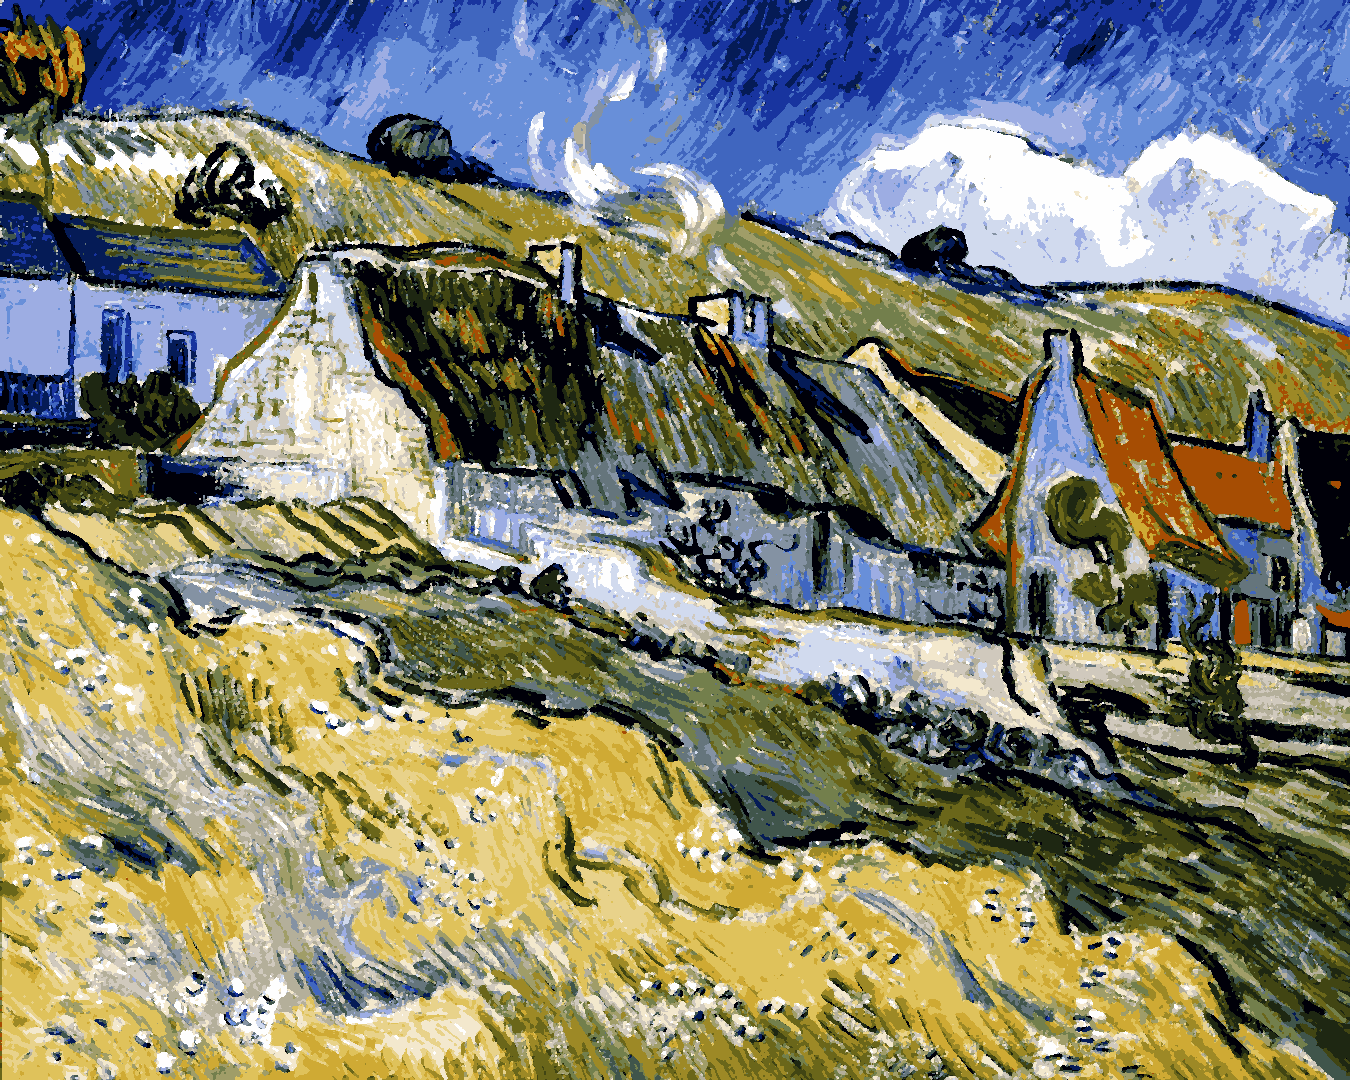 Vincent Van Gogh PD - (140) - Thatched Cottages and Houses - Van-Go Paint-By-Number Kit